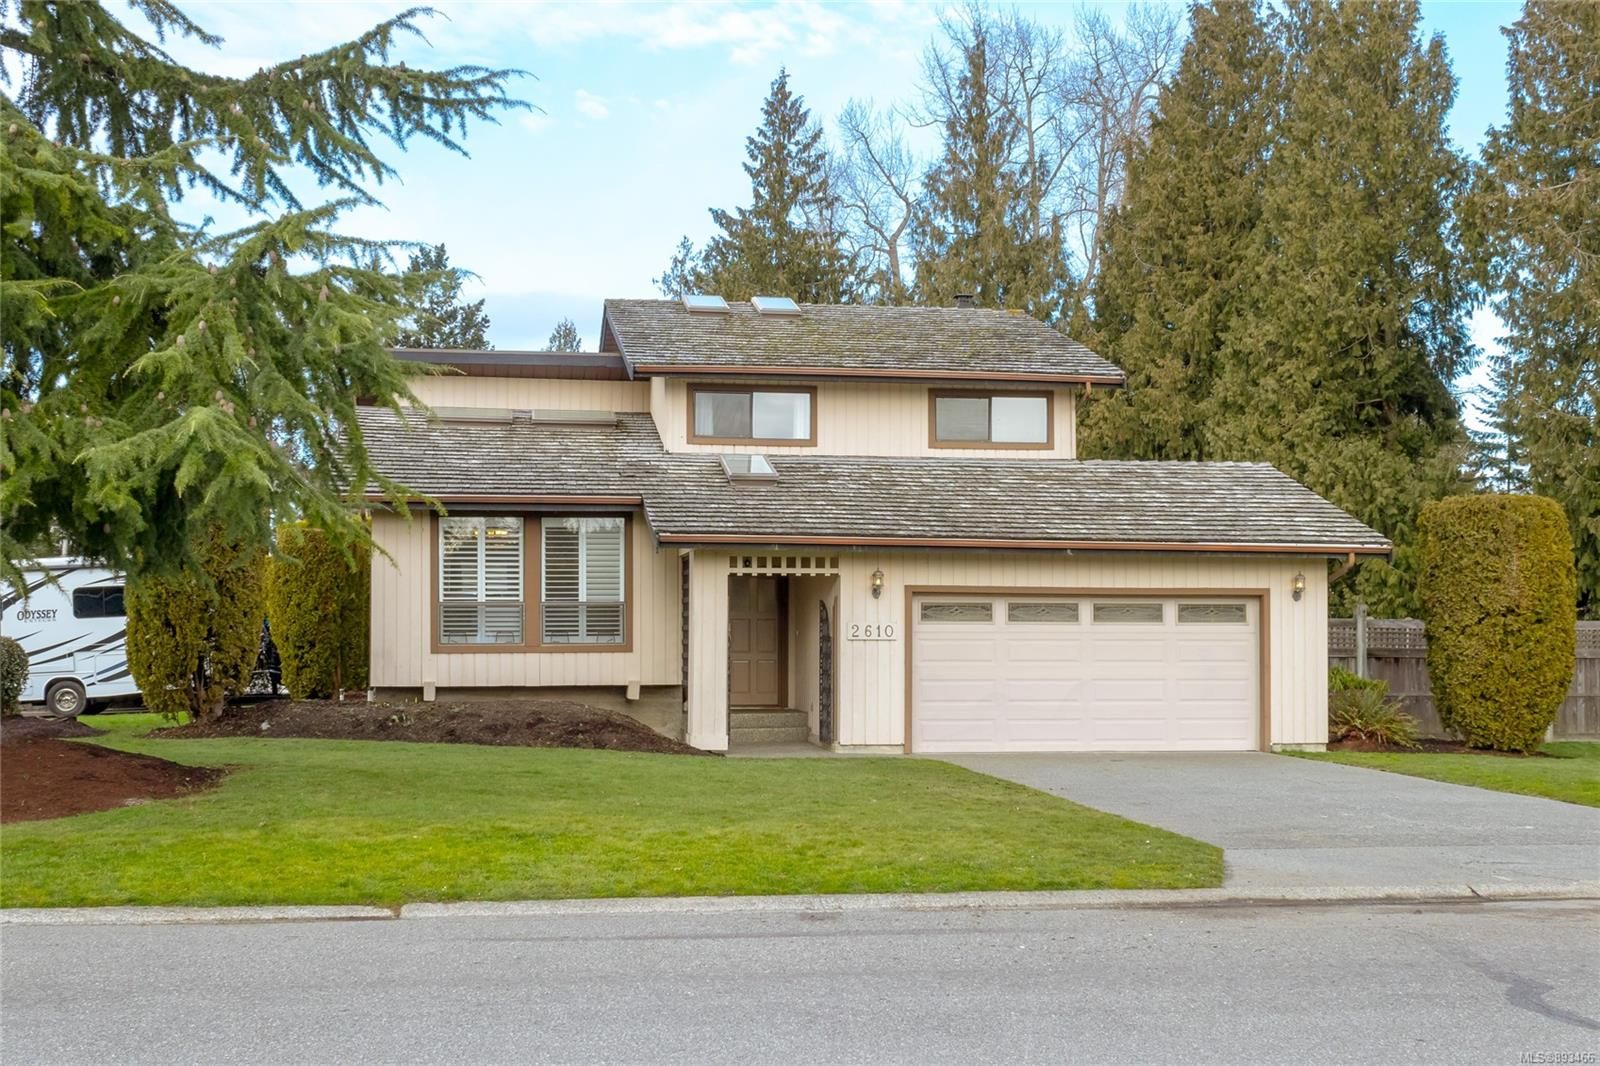 Main Photo: CENTRAL SAANICH REAL ESTATE IN BC = Turgoose Home For Sale SOLD With Ann Watley.